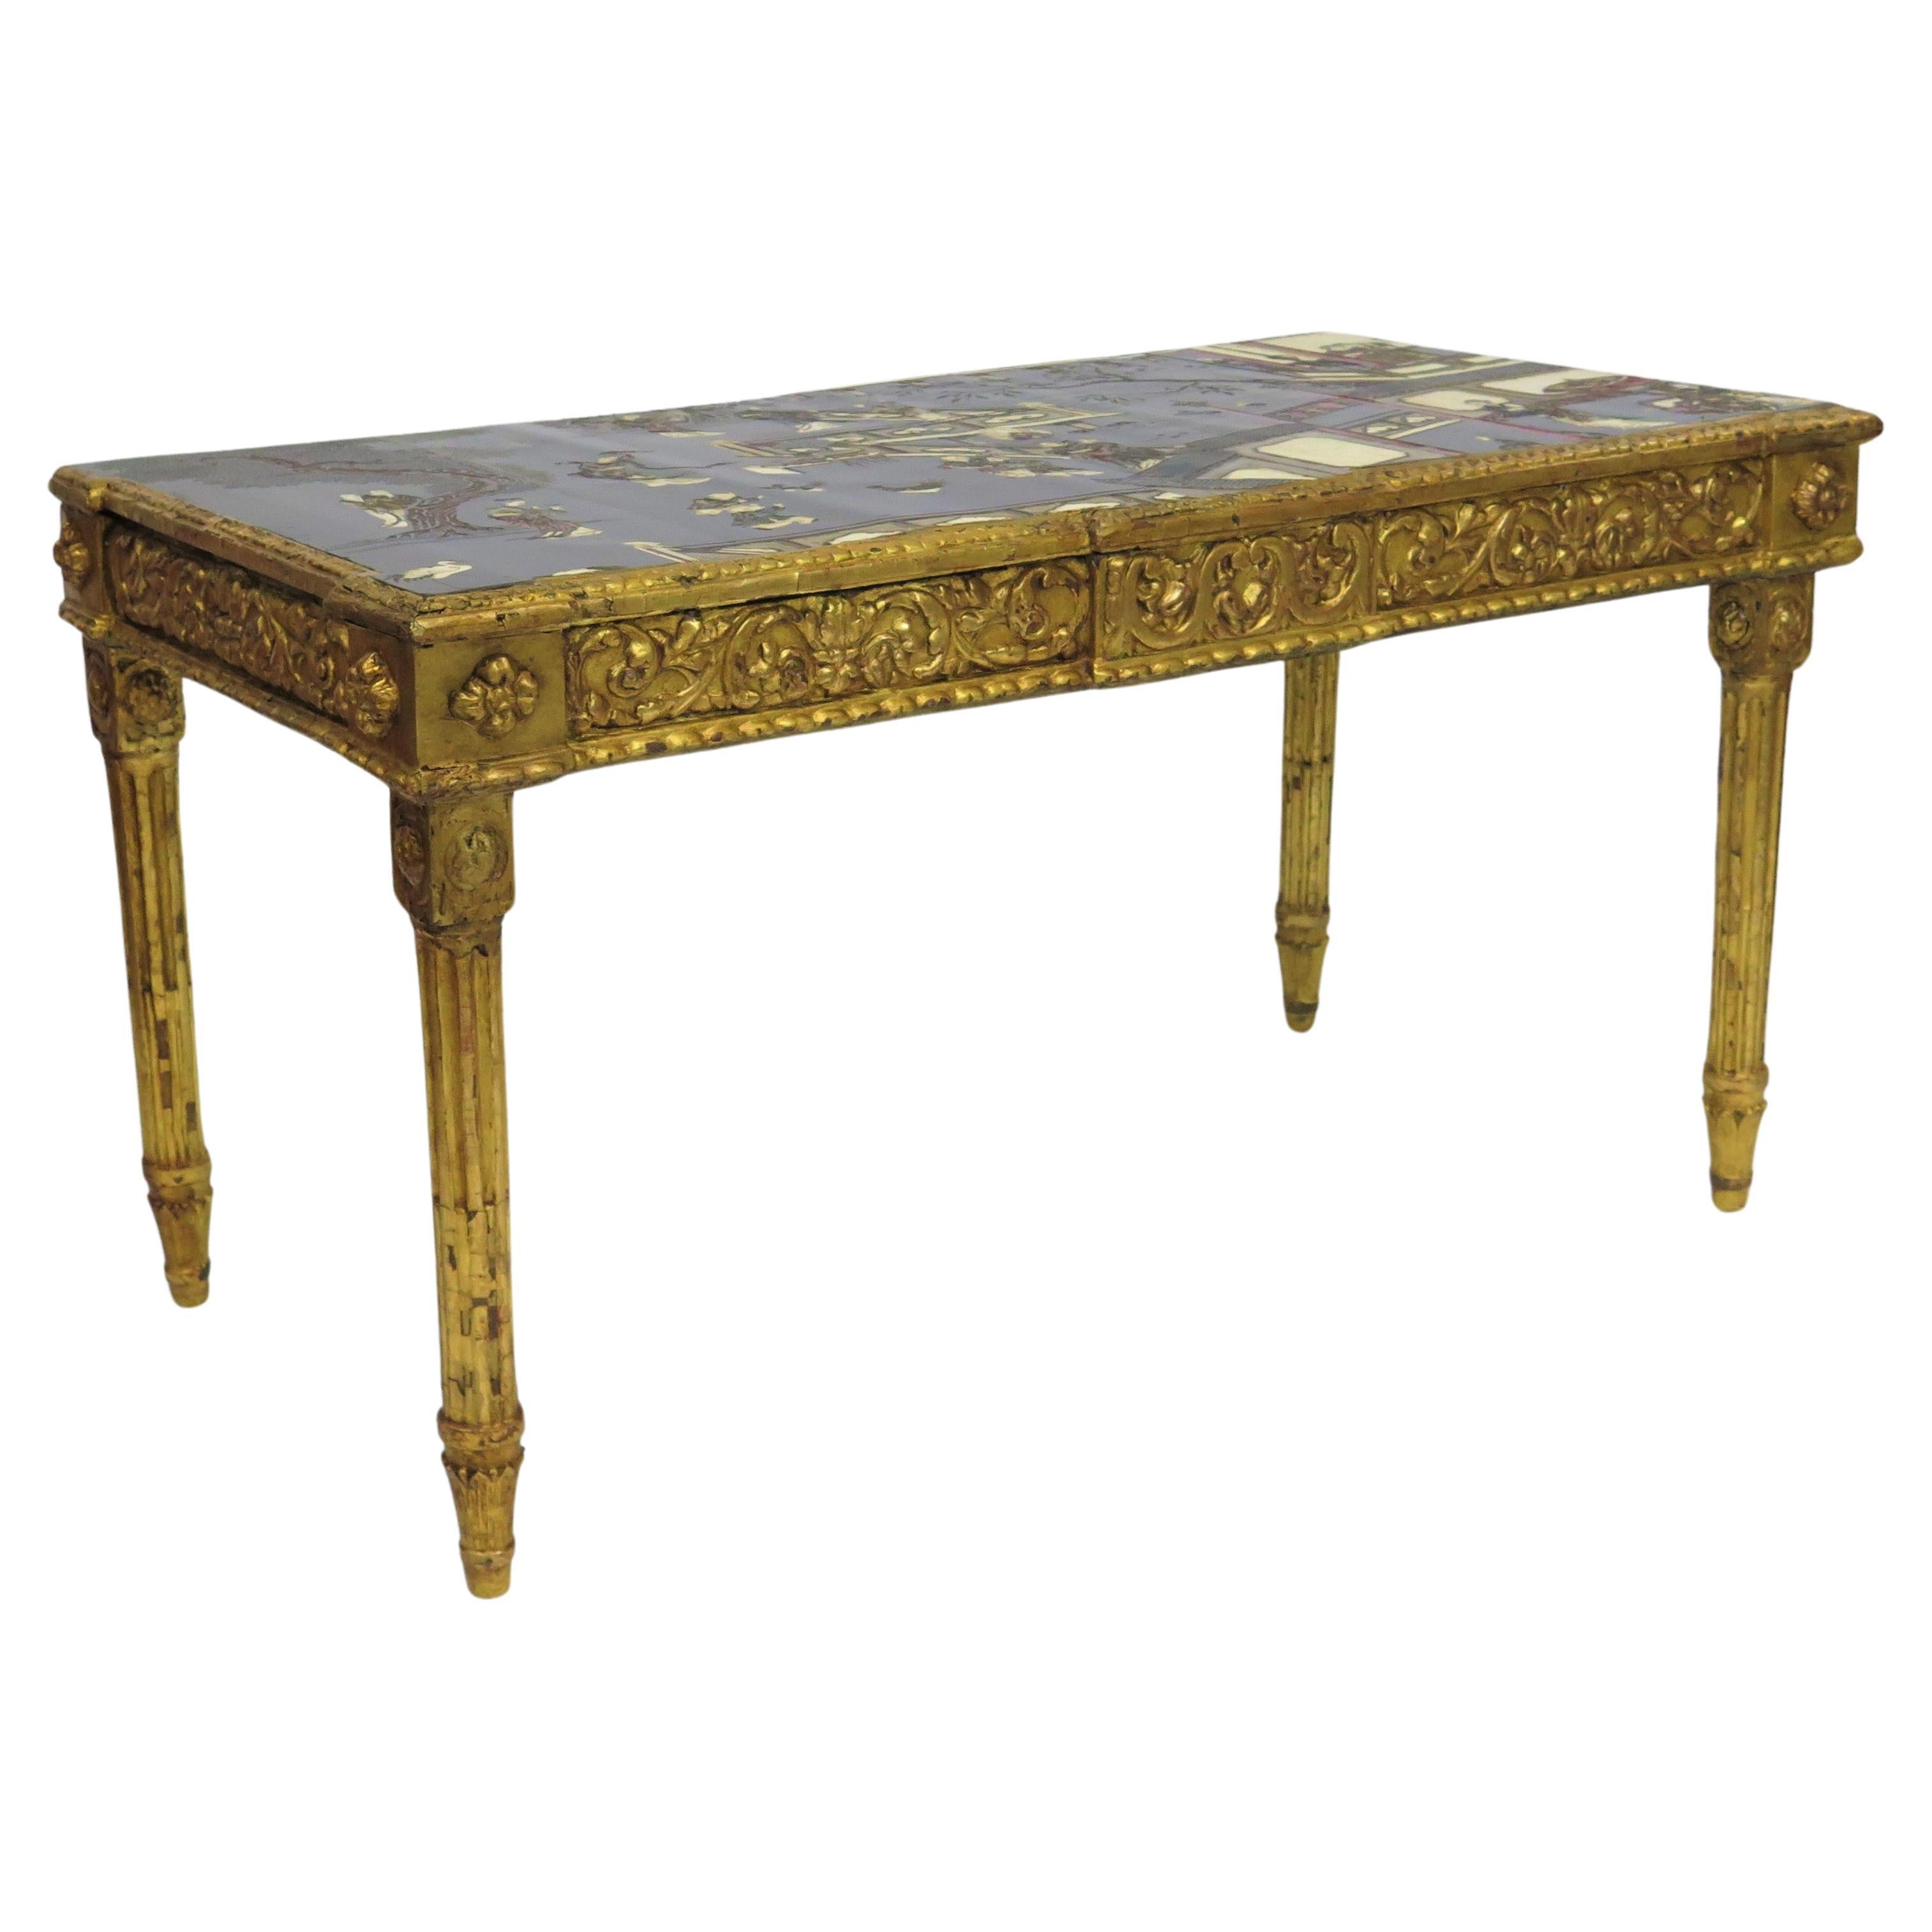 18th Century French Console with Chinese Coromandel Top